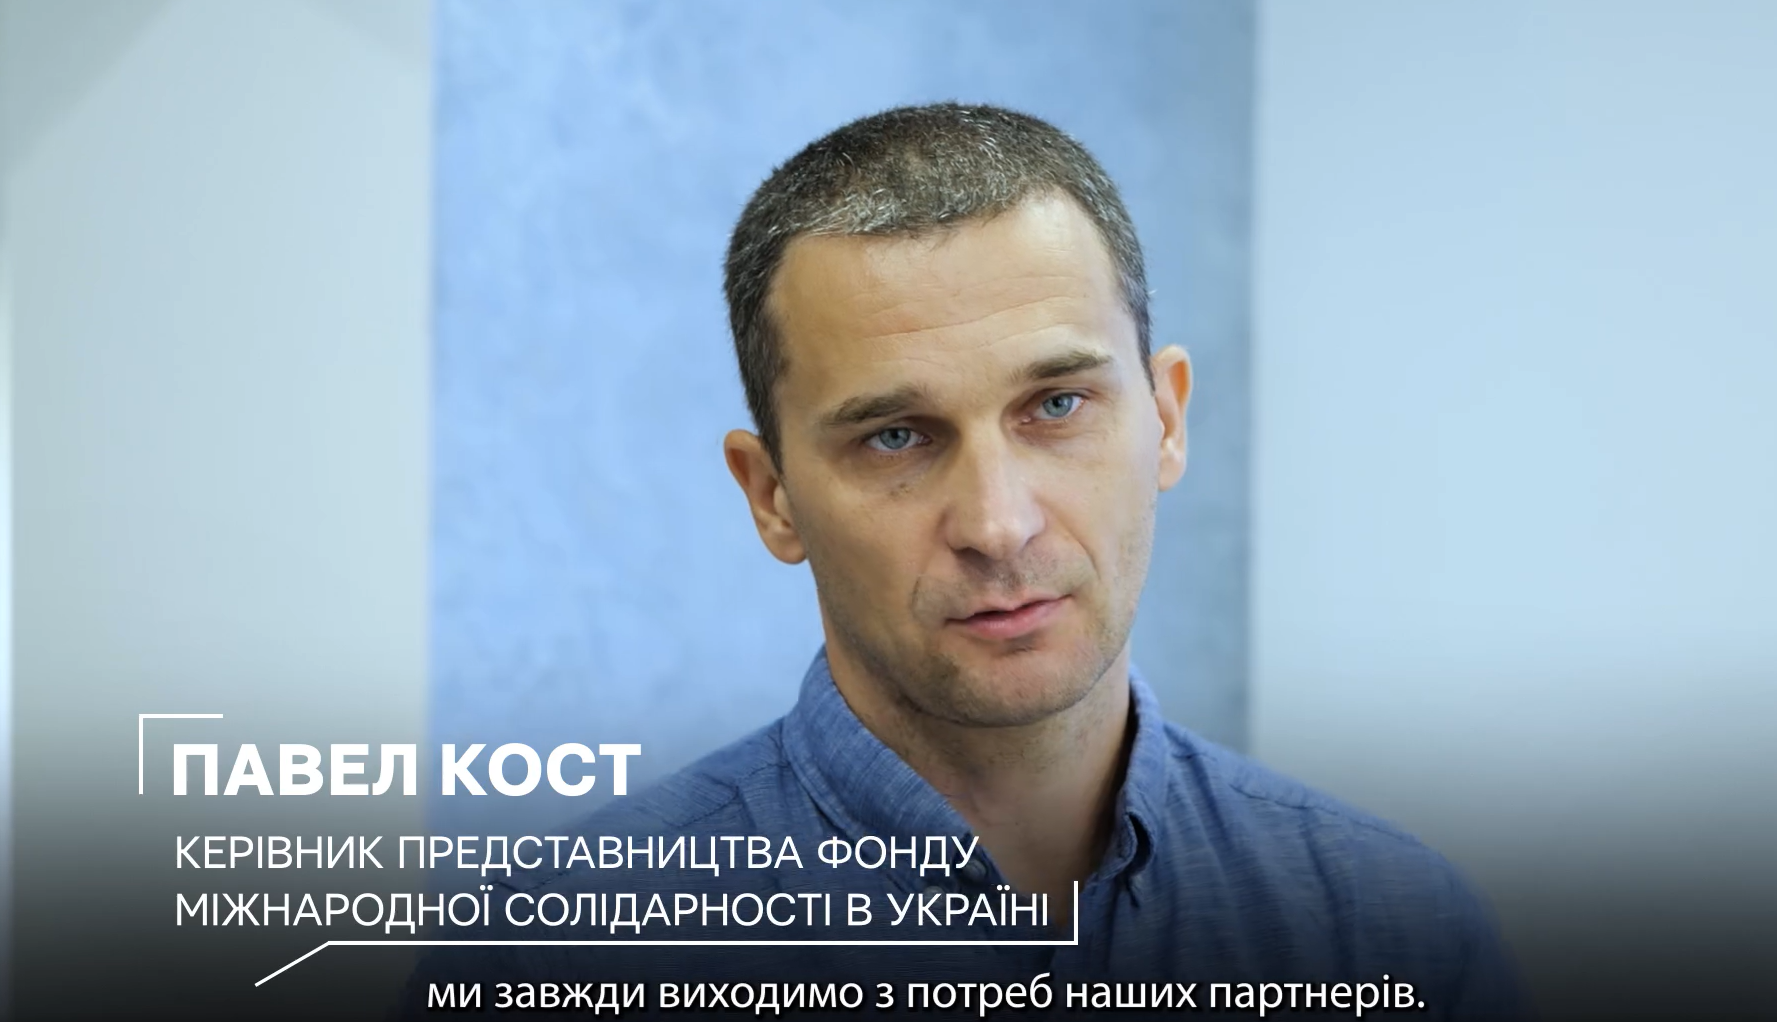 Video about the development of the project PRO_MentalHealth (Psychosocial Support in Ukraine)